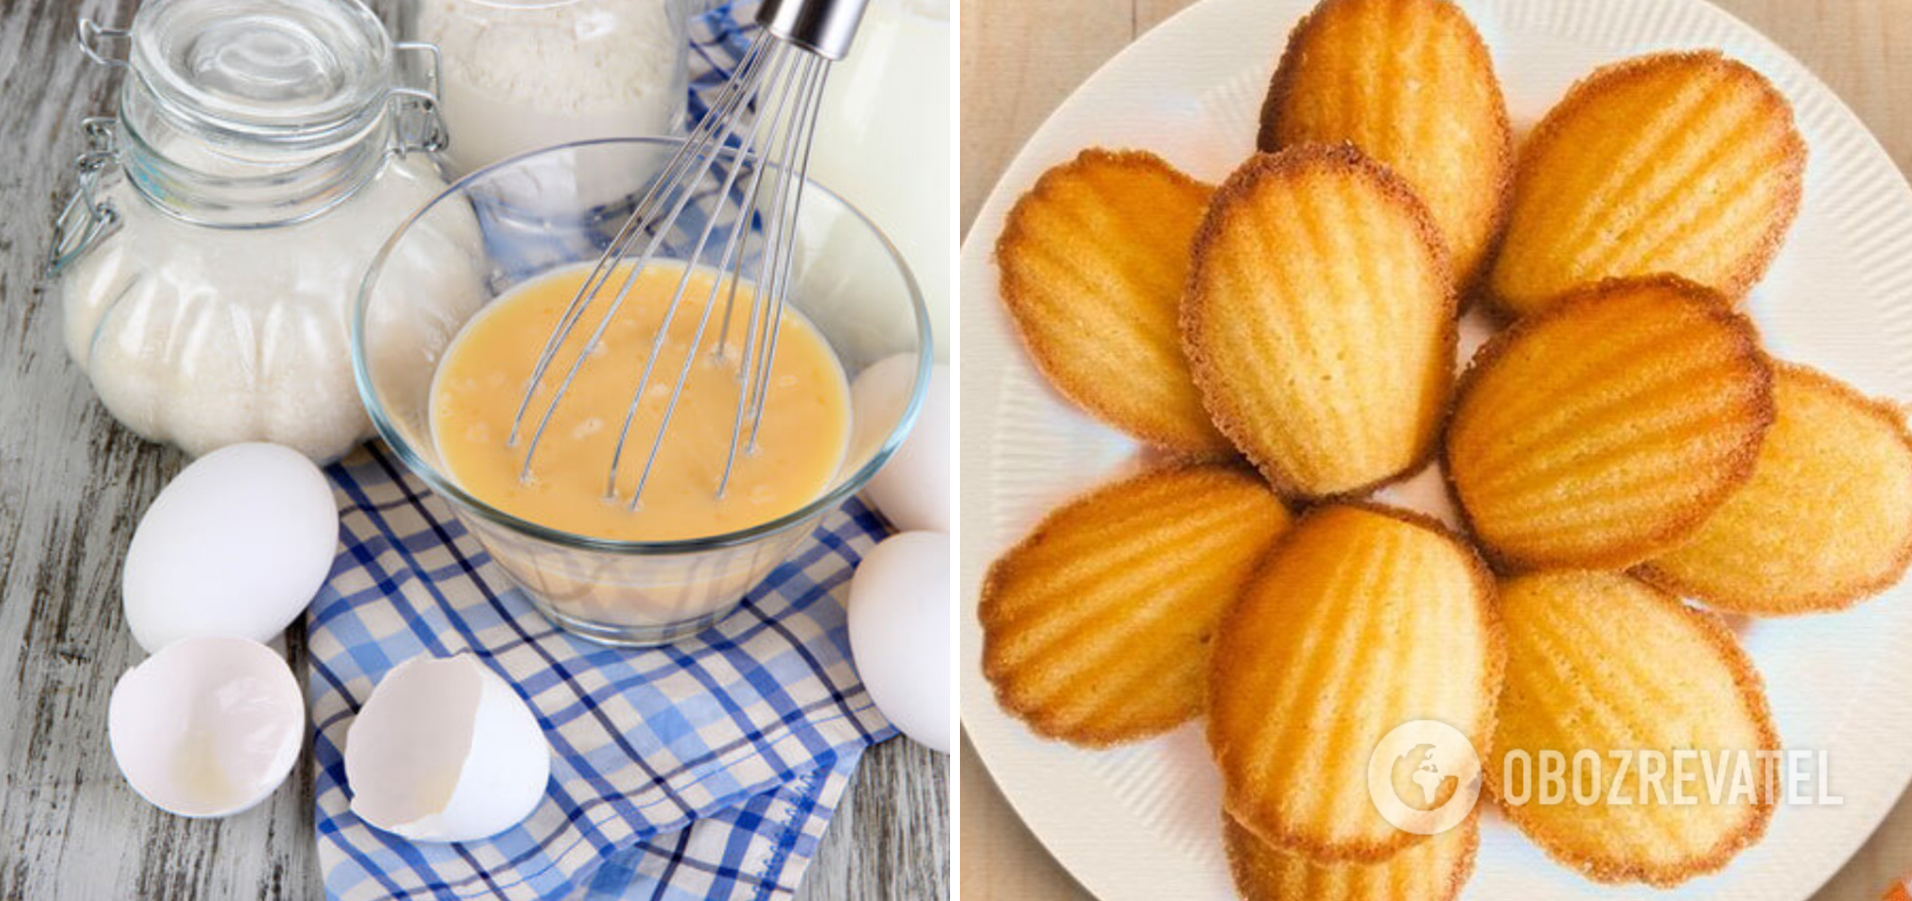 Madeleine cookies: a classic recipe for a flavorful pastry